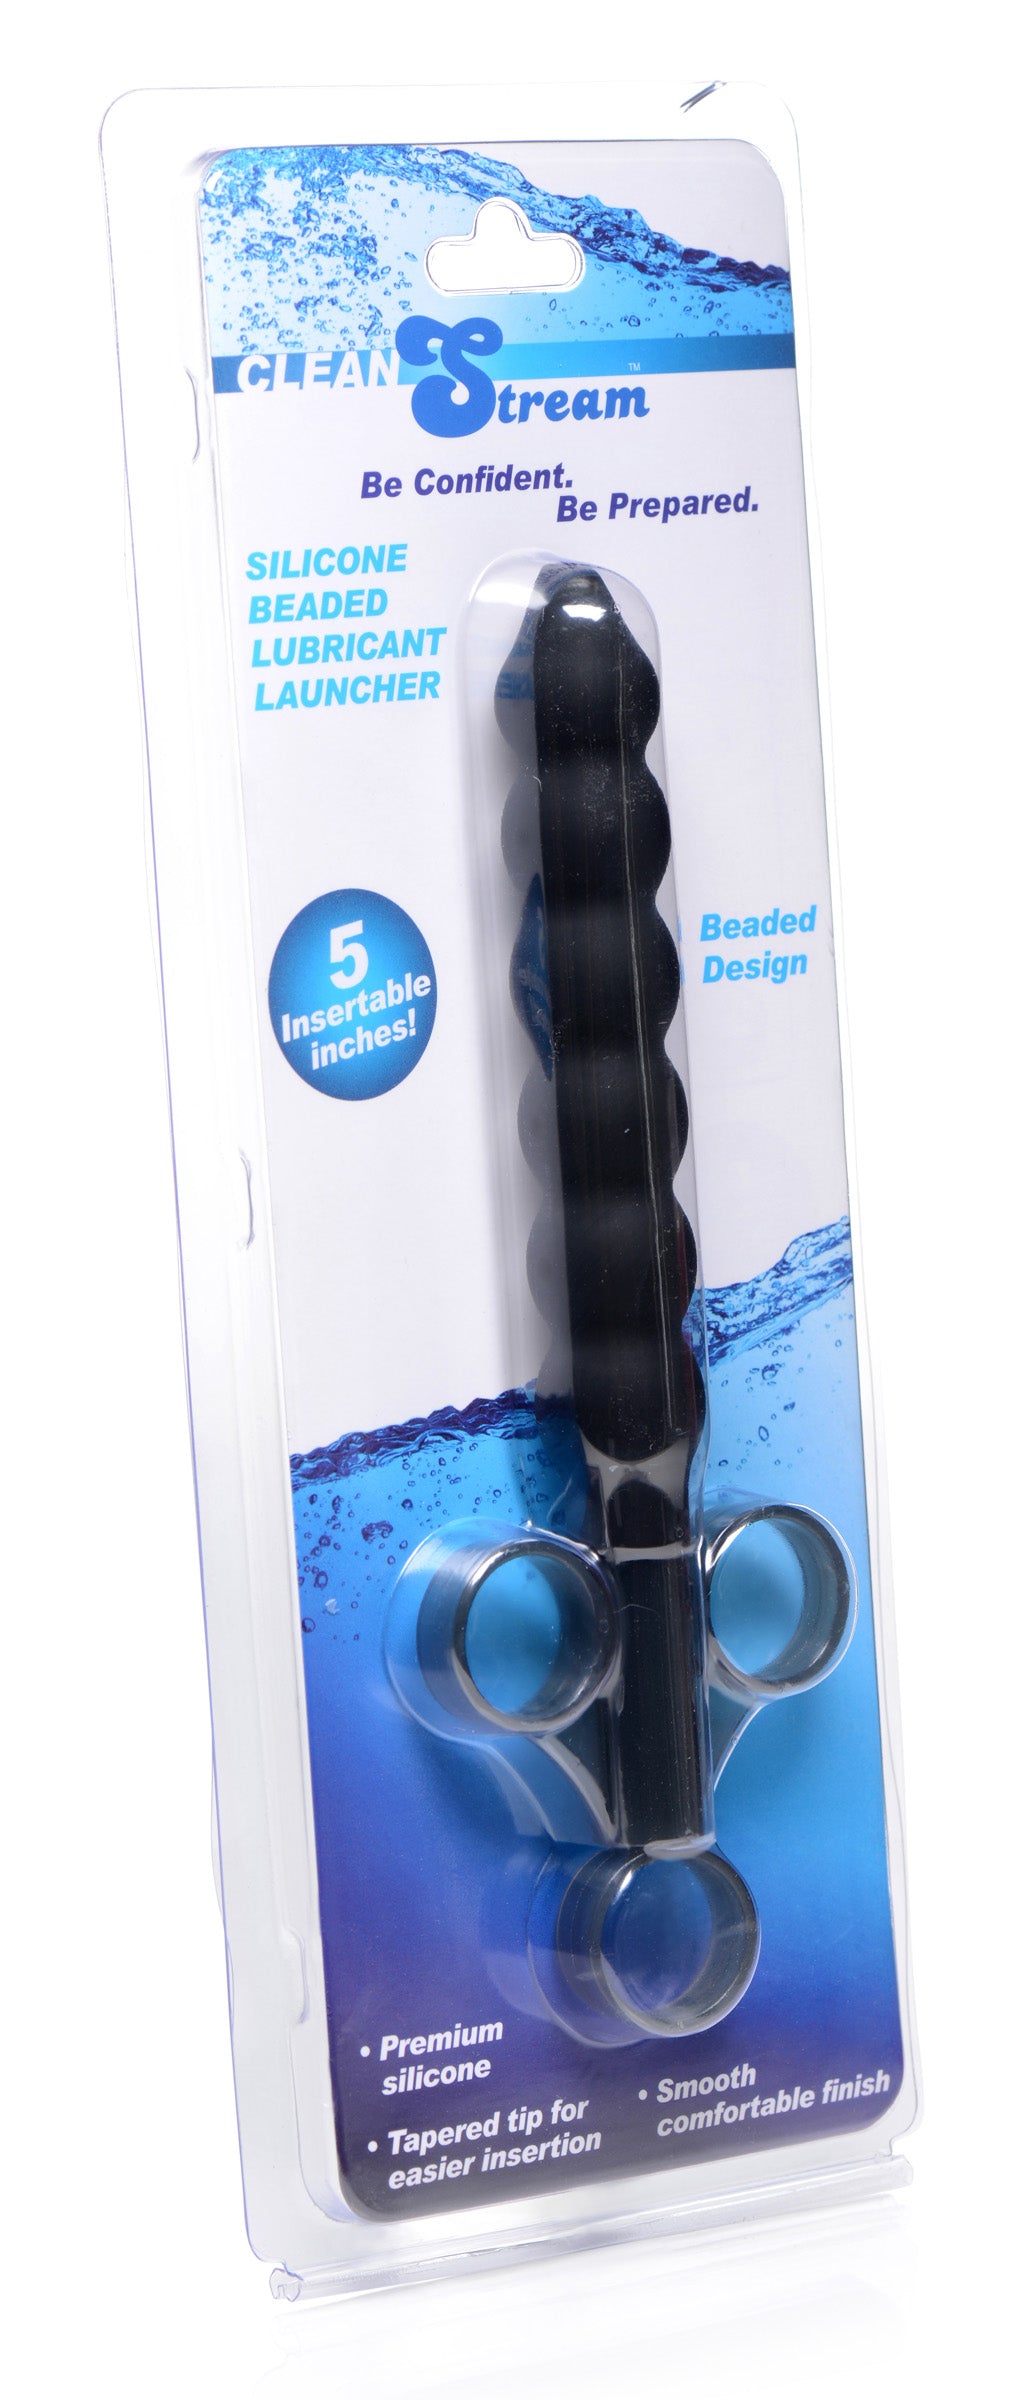 Silicone Beaded Lubricant Launcher - UABDSM